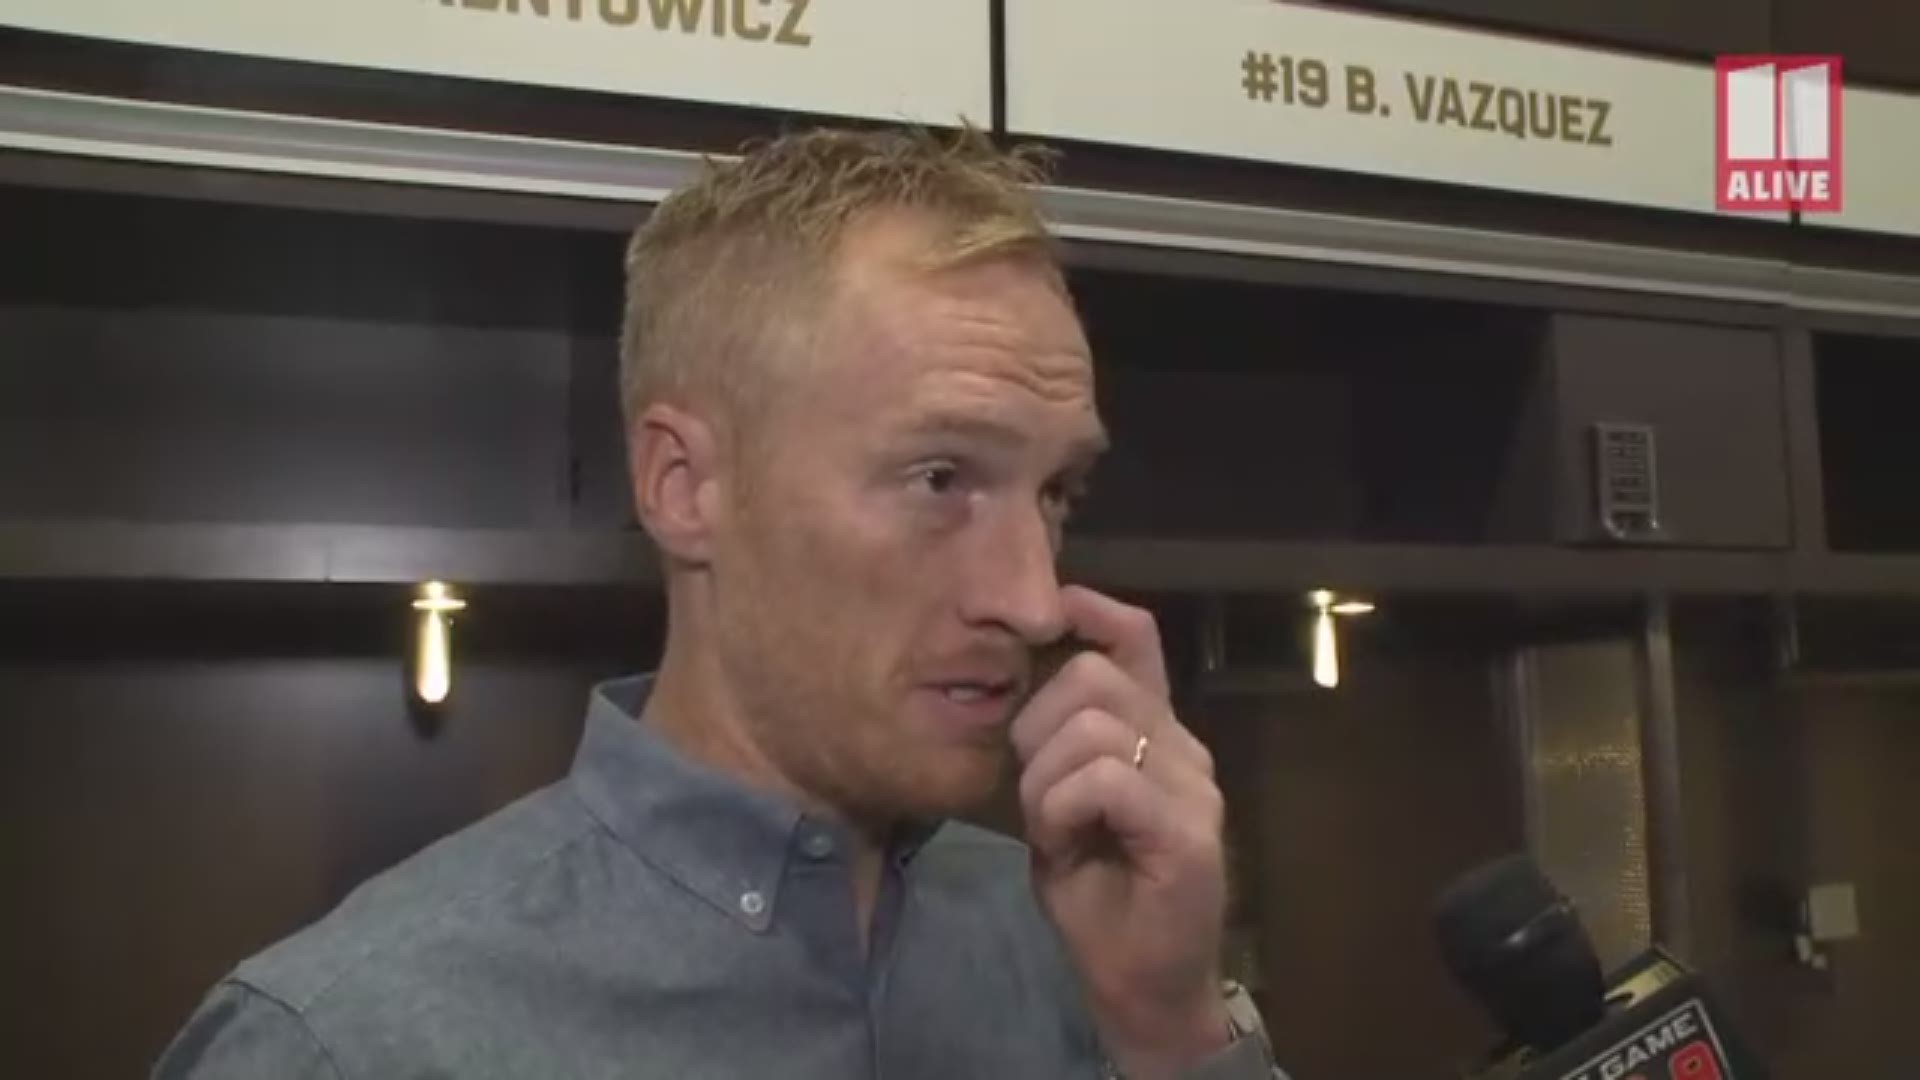 Jeff Larentowicz said the next game may be a tough one, but they plan to give it their all.